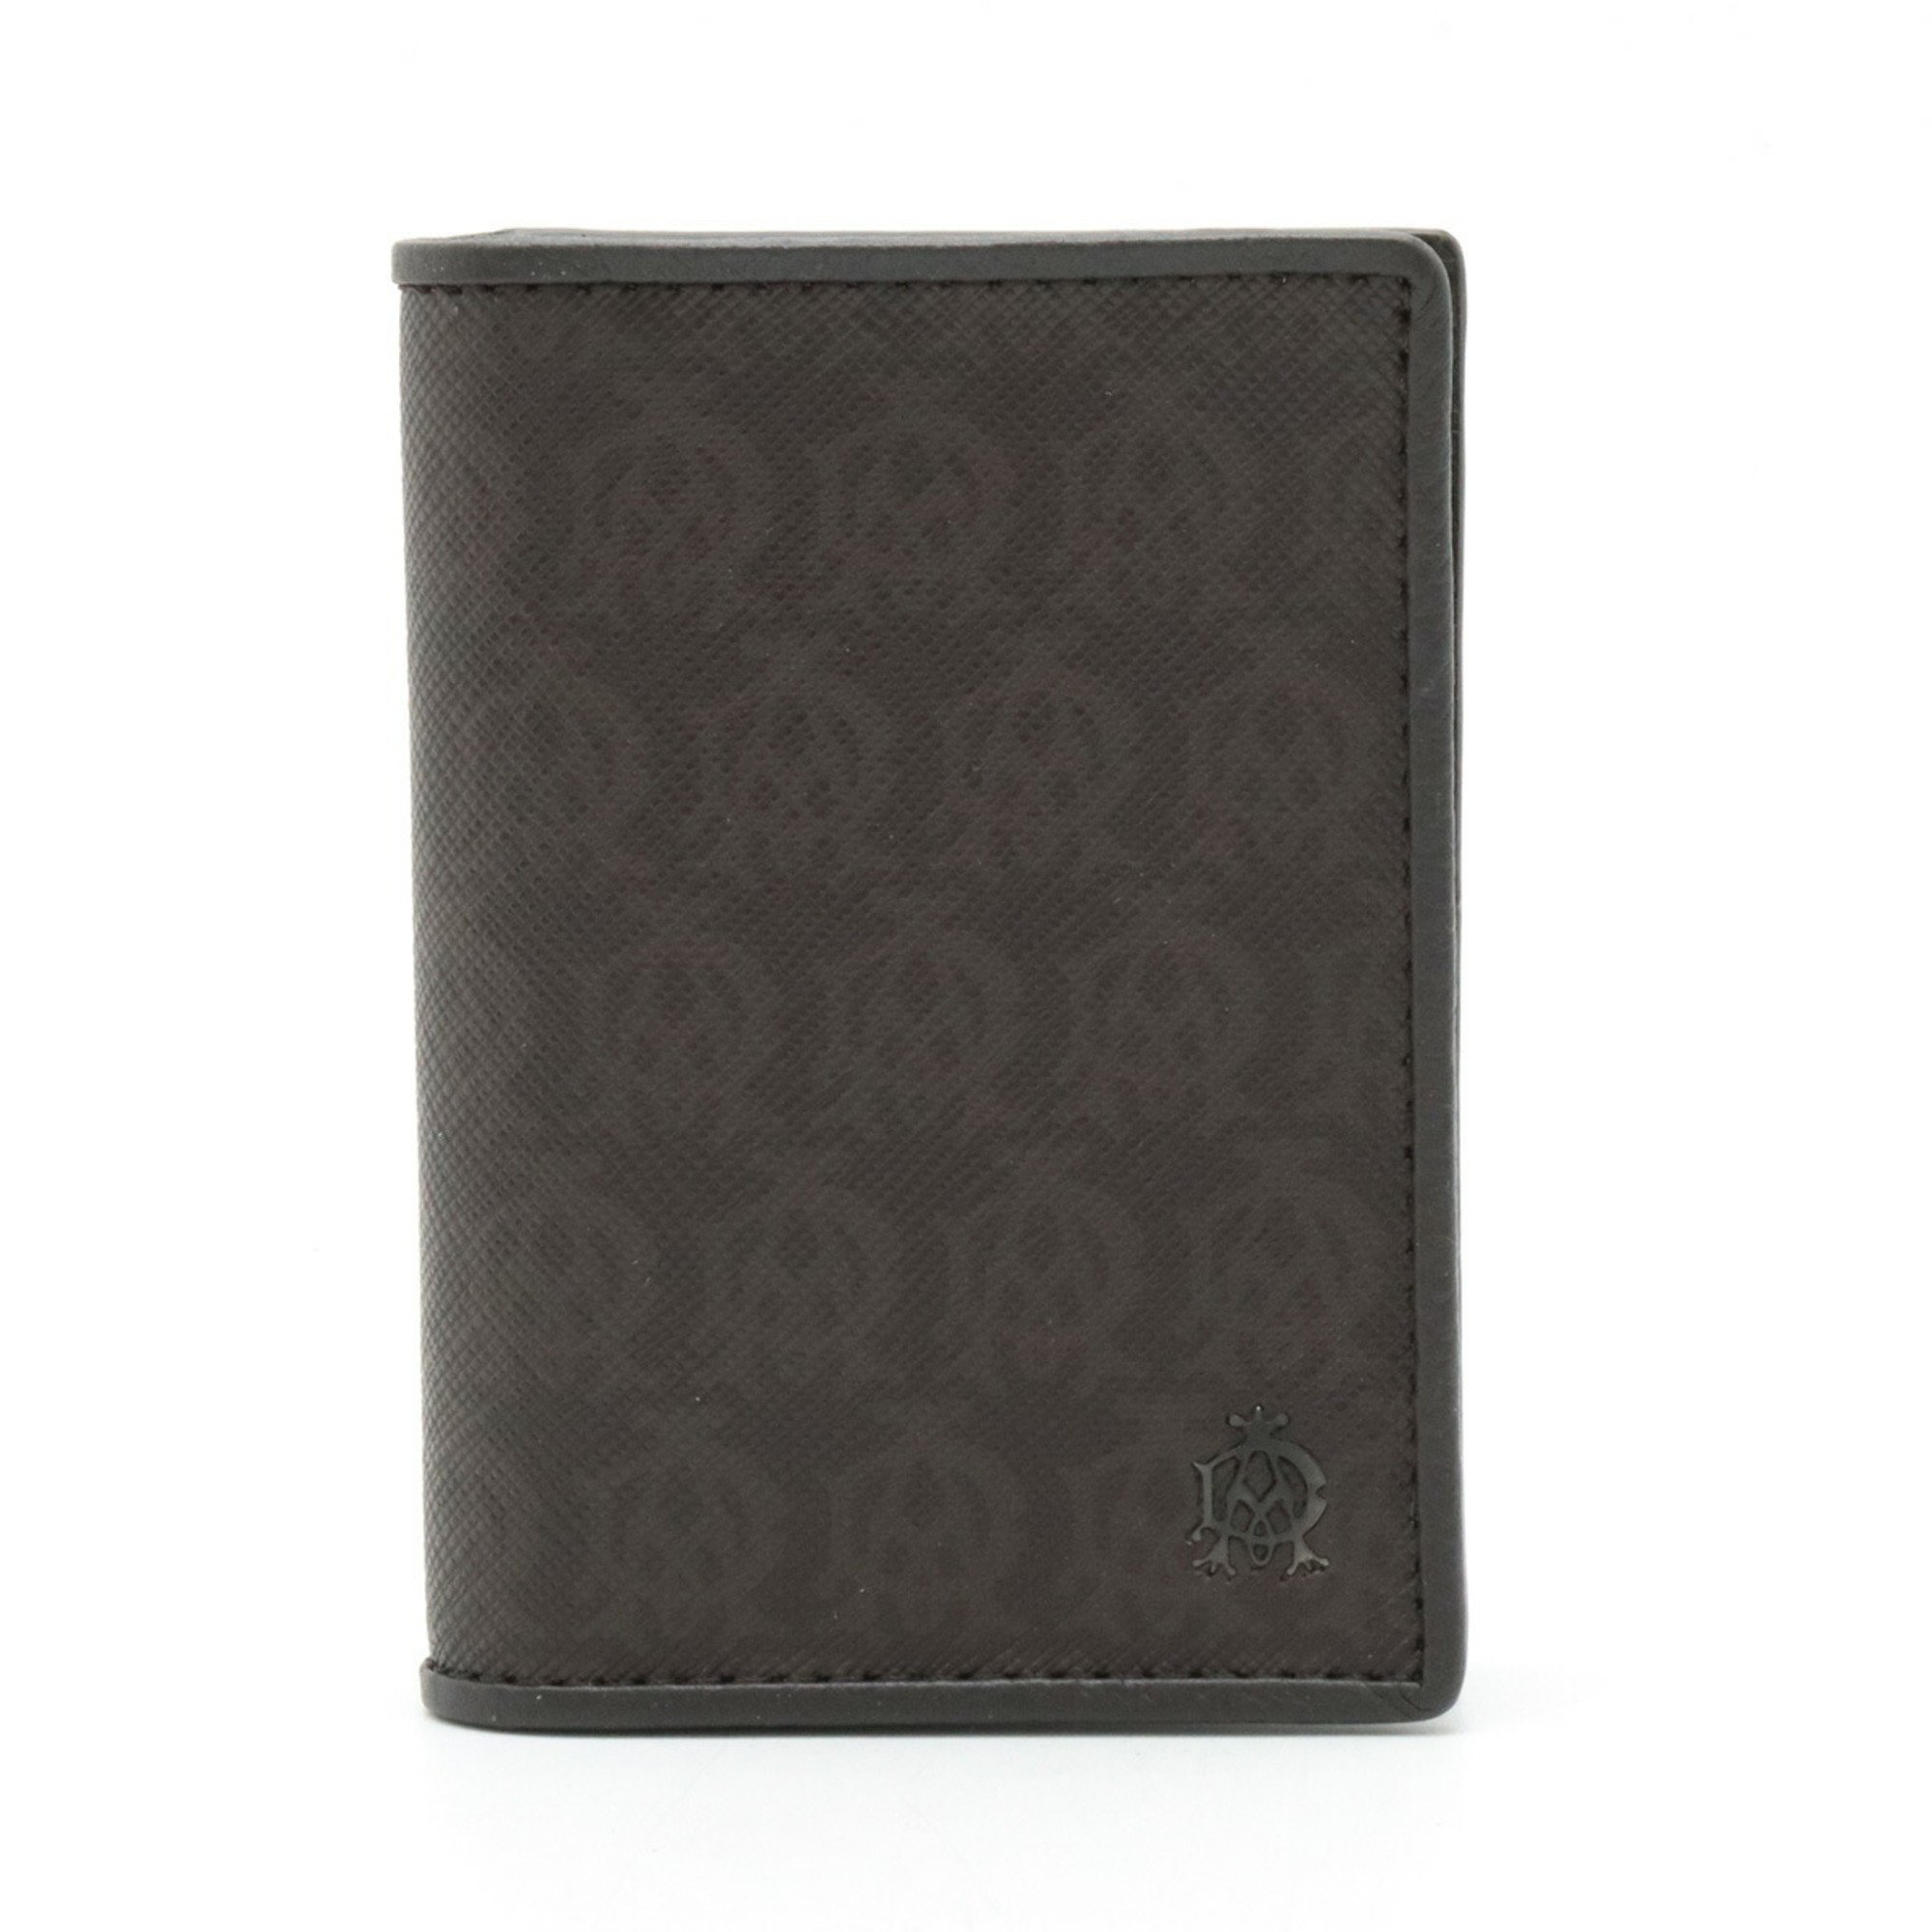 Dunhill Windsor Card Case, Business Holder, Pass PVC, Leather, Dark Brown, L2N747B